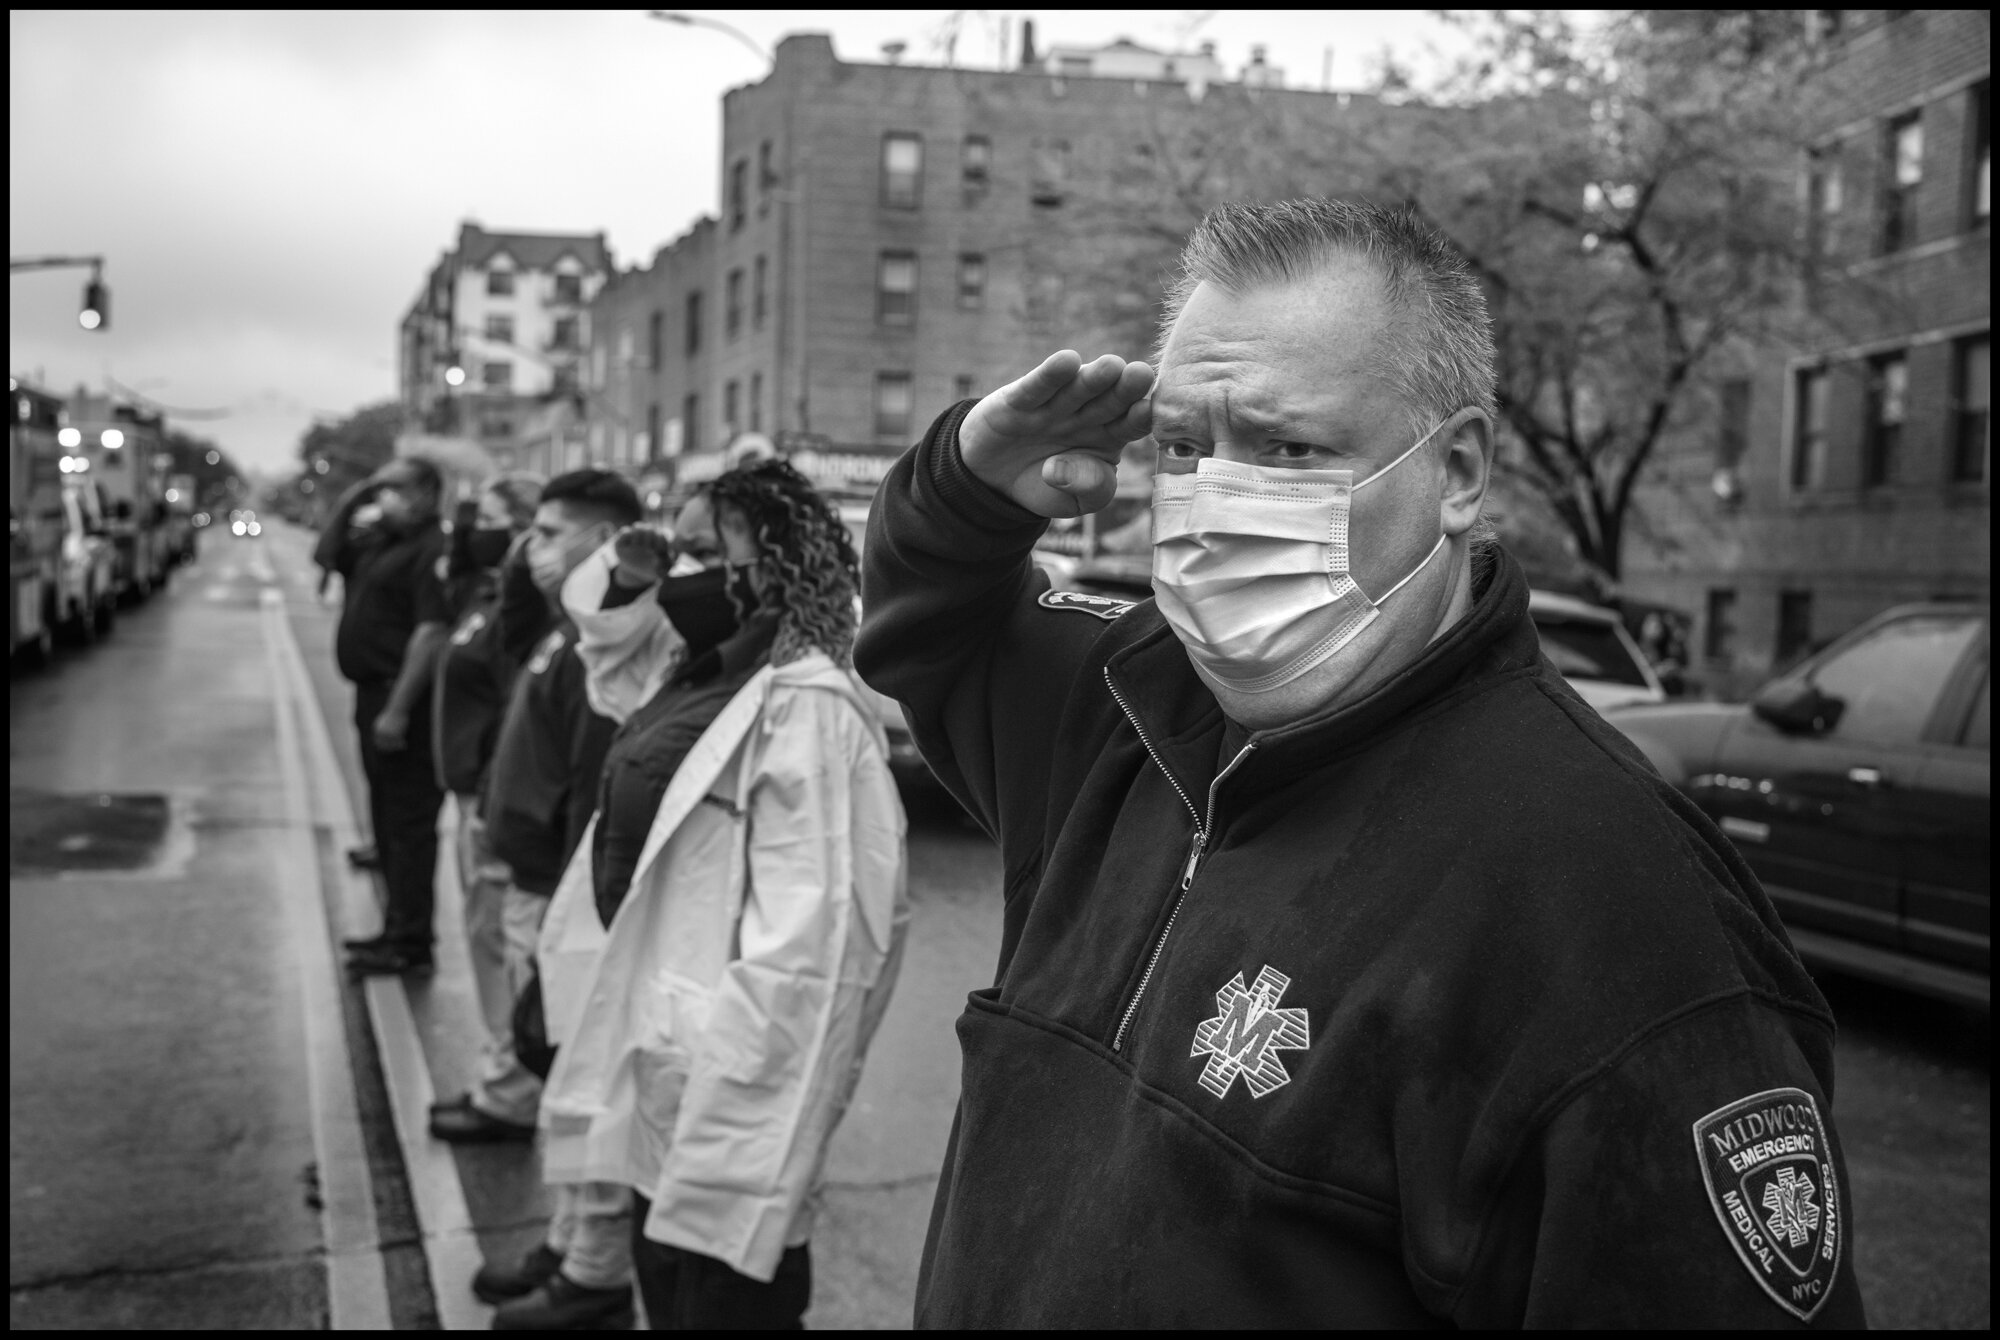  A funeral ceremony for Anthony “Tony” Thomas-a legendary Paramedic in the New York City area, who died of Covid-19 related causes. Bay Ridge, Brooklyn, New York.  April 30, 2020. © Peter Turnley.   ID# 32-020 